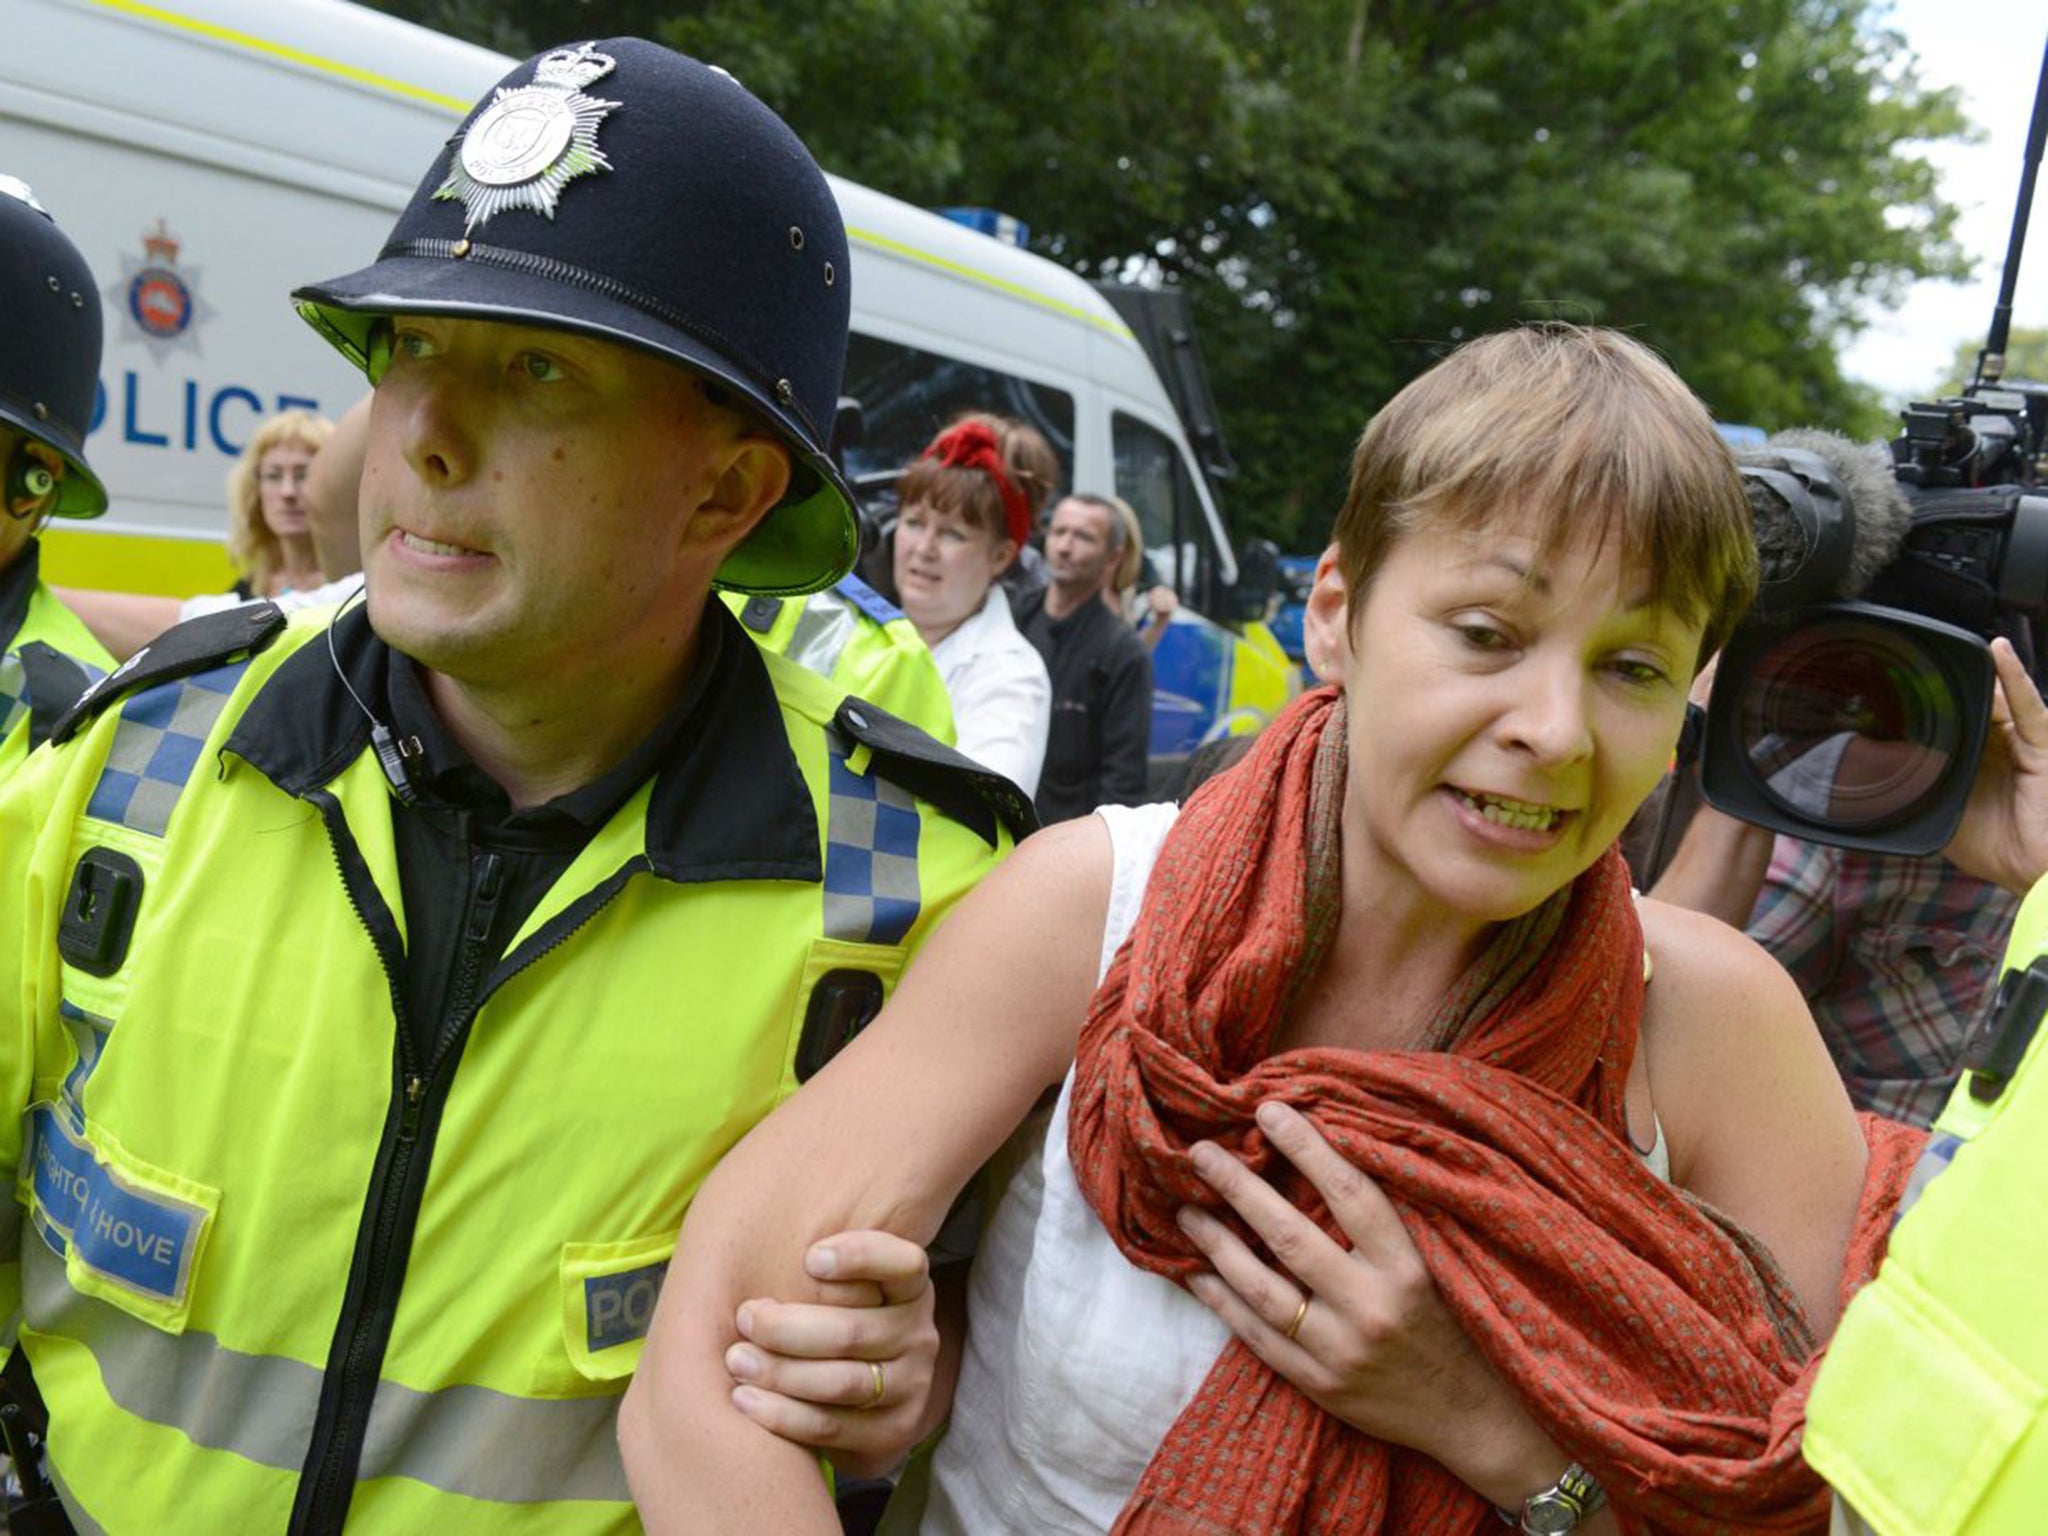 Caroline Lucas MP was arrested at an anti-fracking protest, and cleared